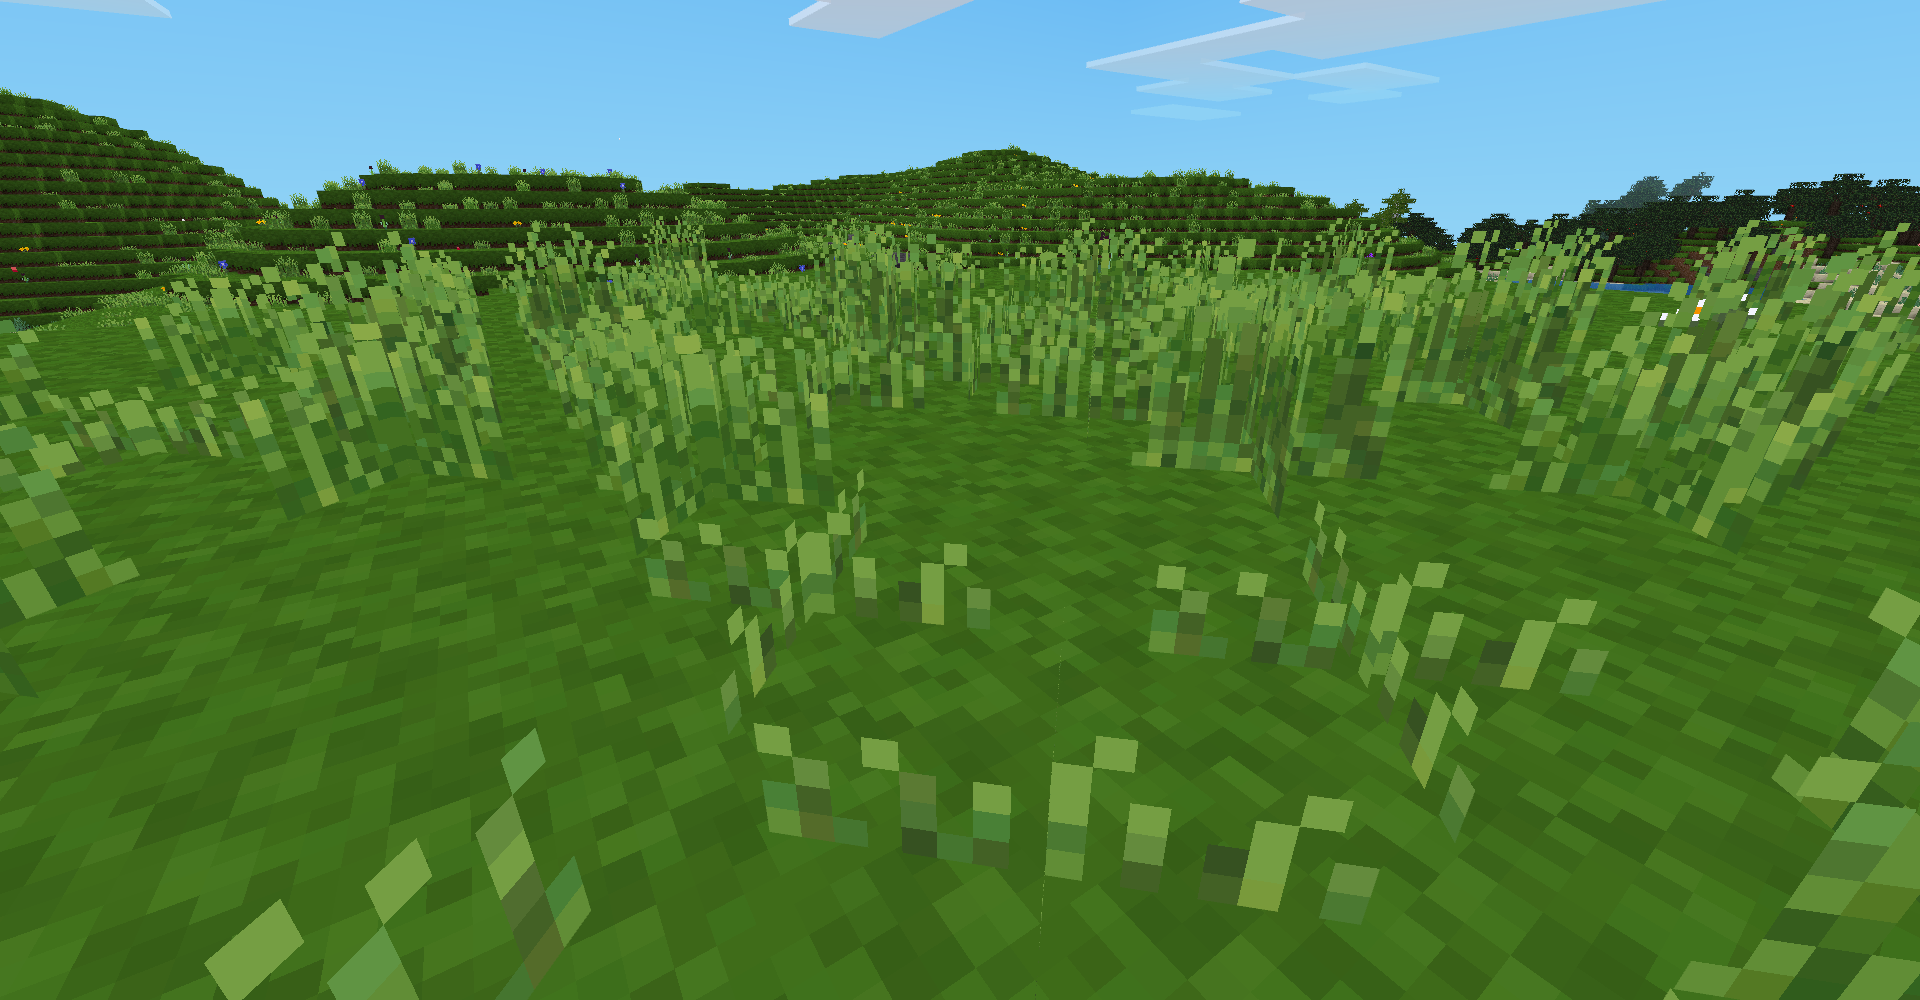 Lots of grass